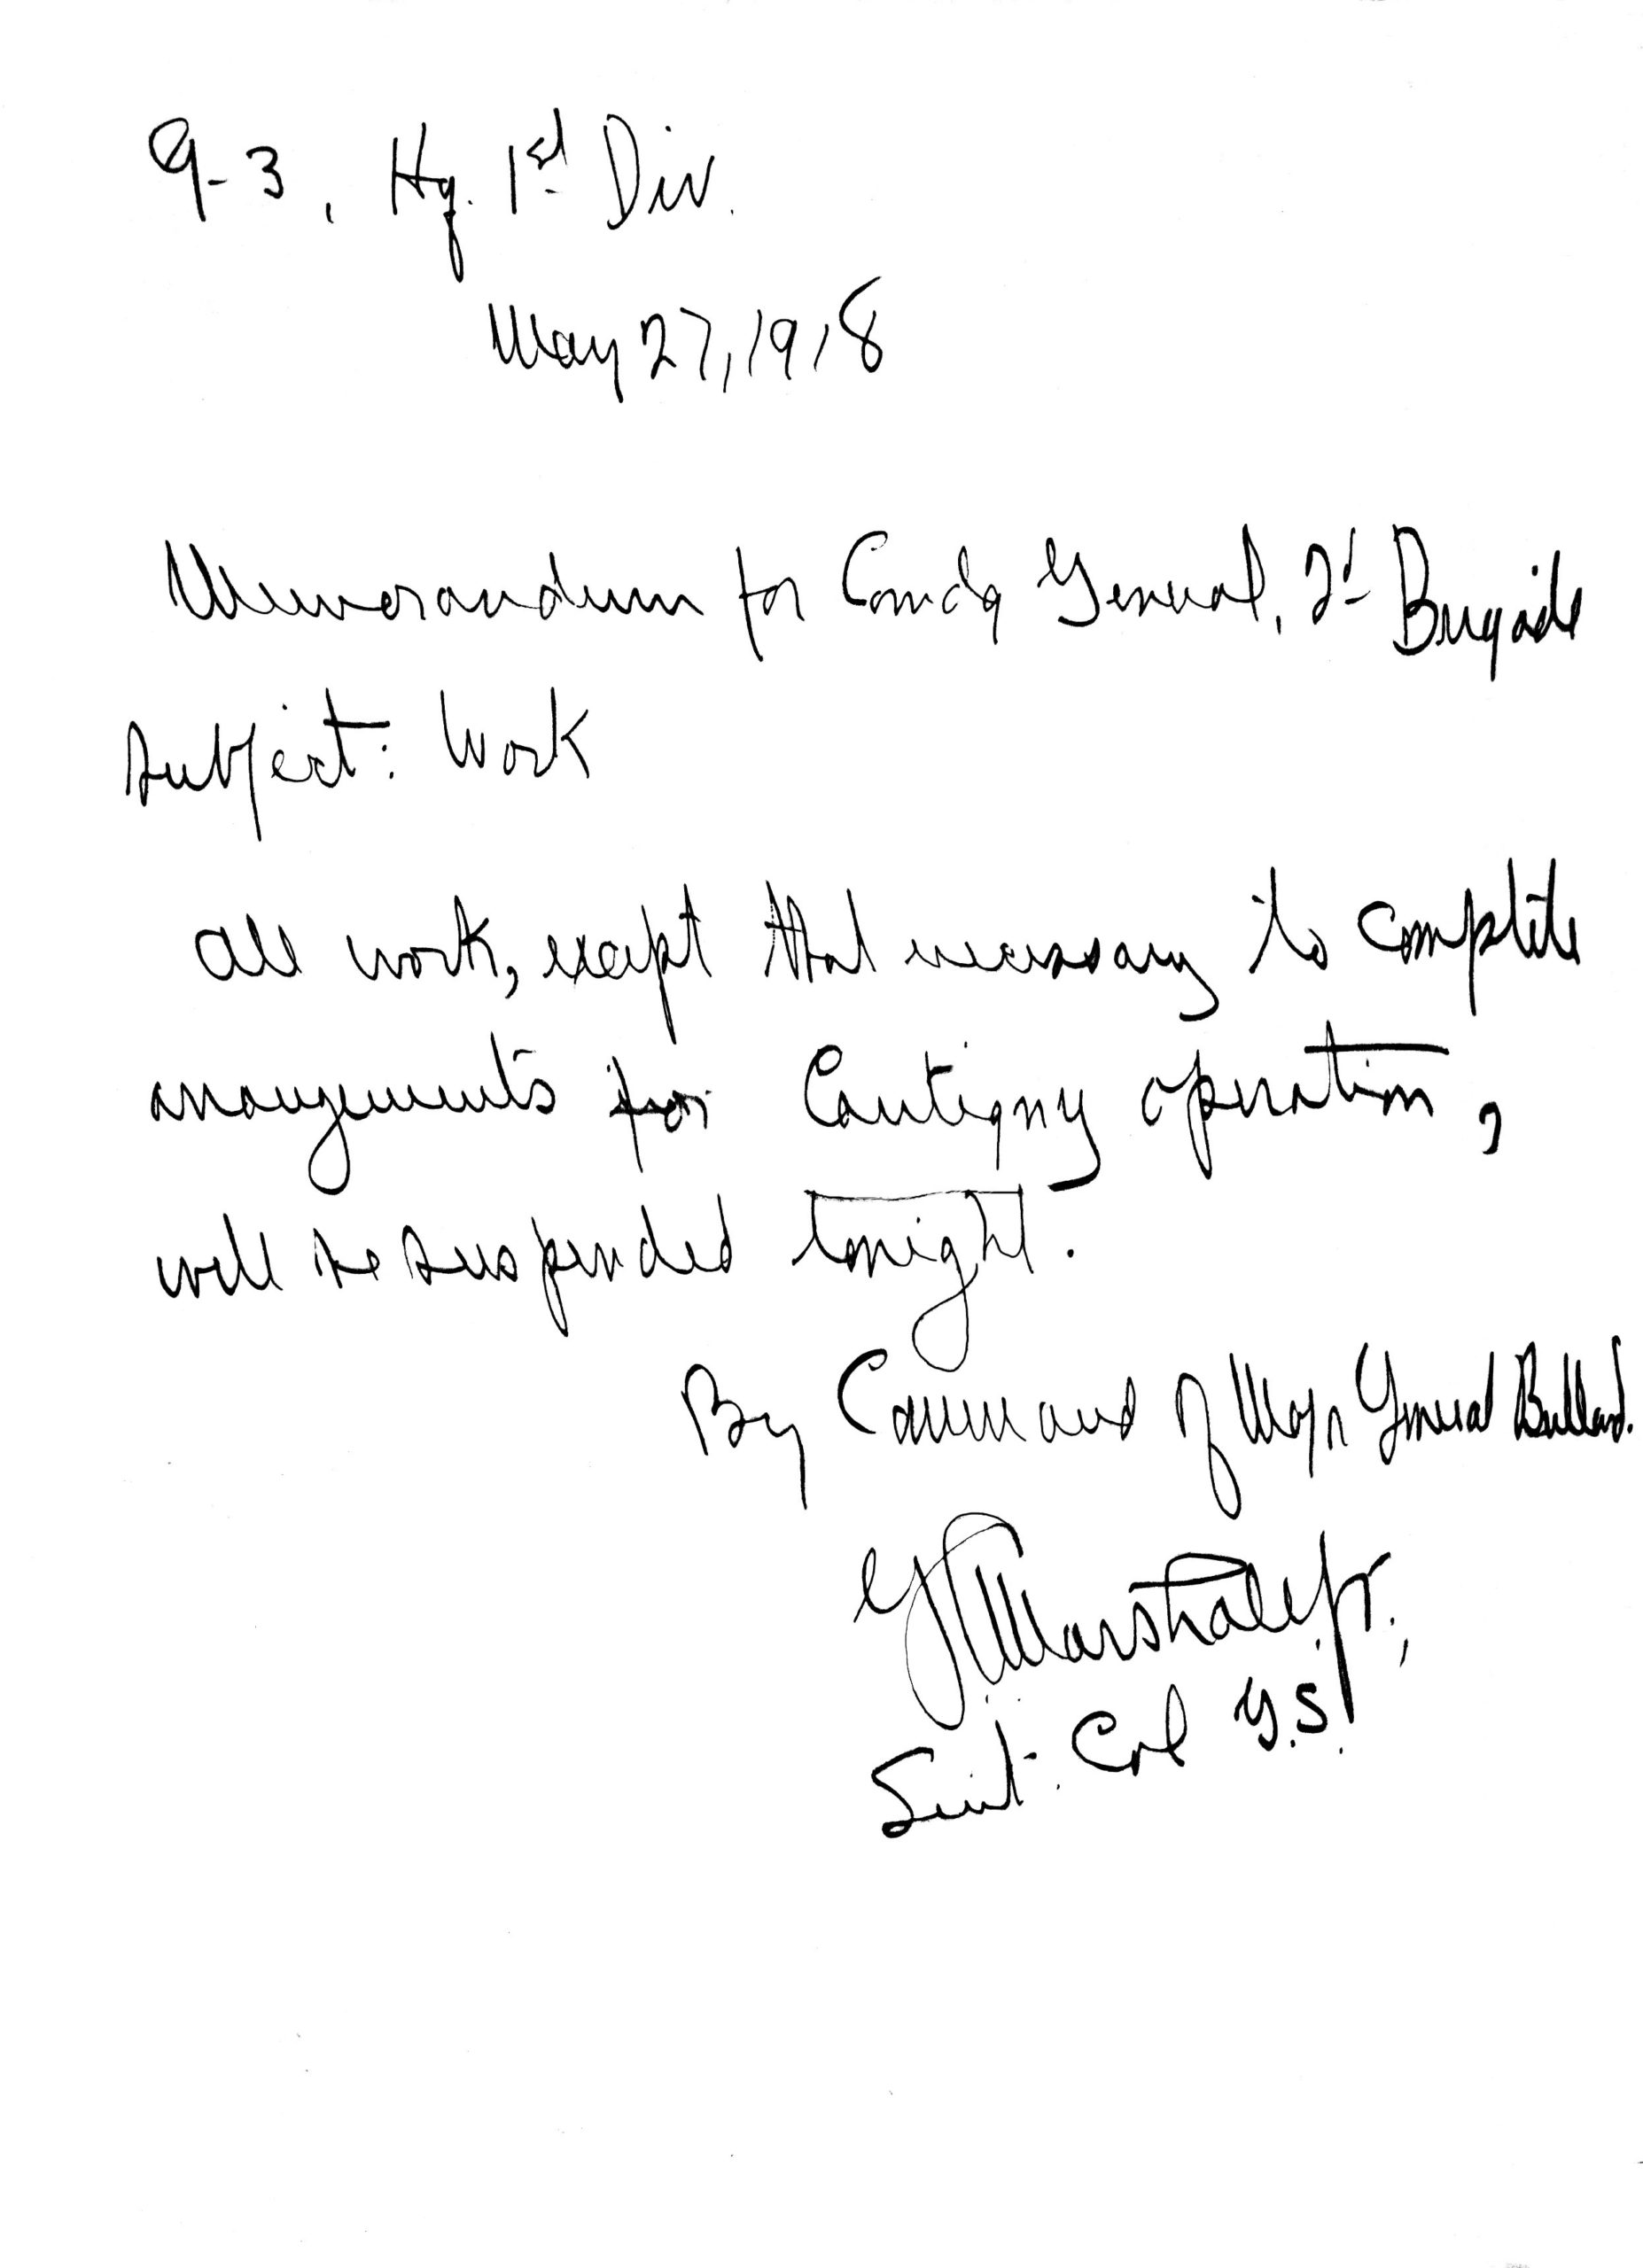 Note from Lt. Col. Marshall the day before the battle began.